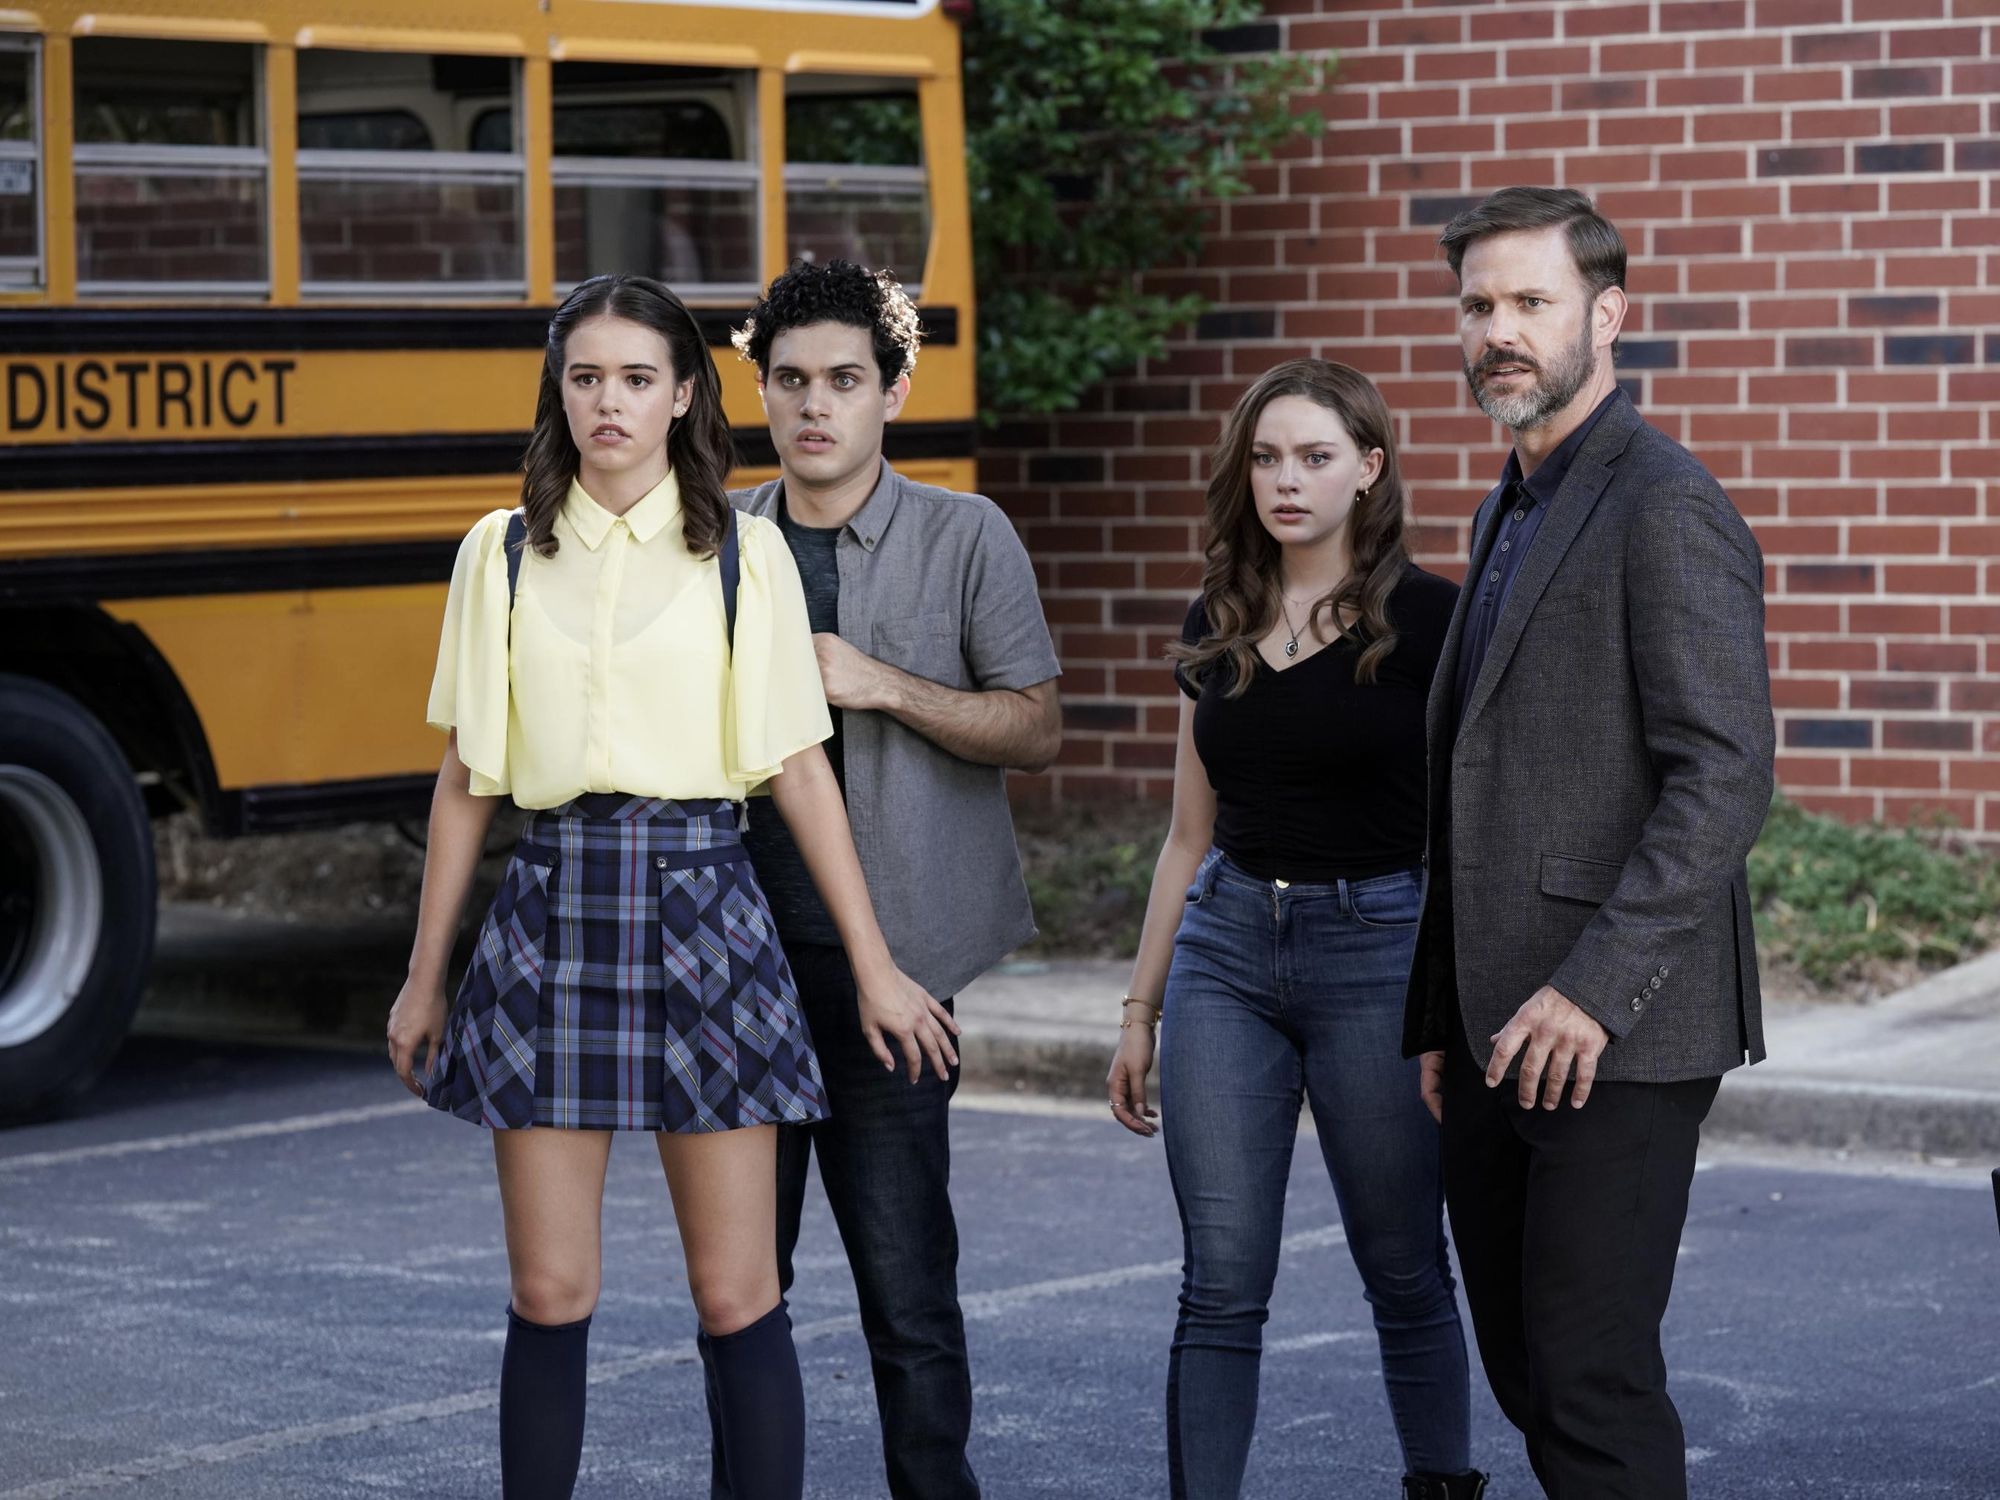 Josie, Landon, Hope, and Alaric stand next to a school bus in a parking lot looking warily into the distance.